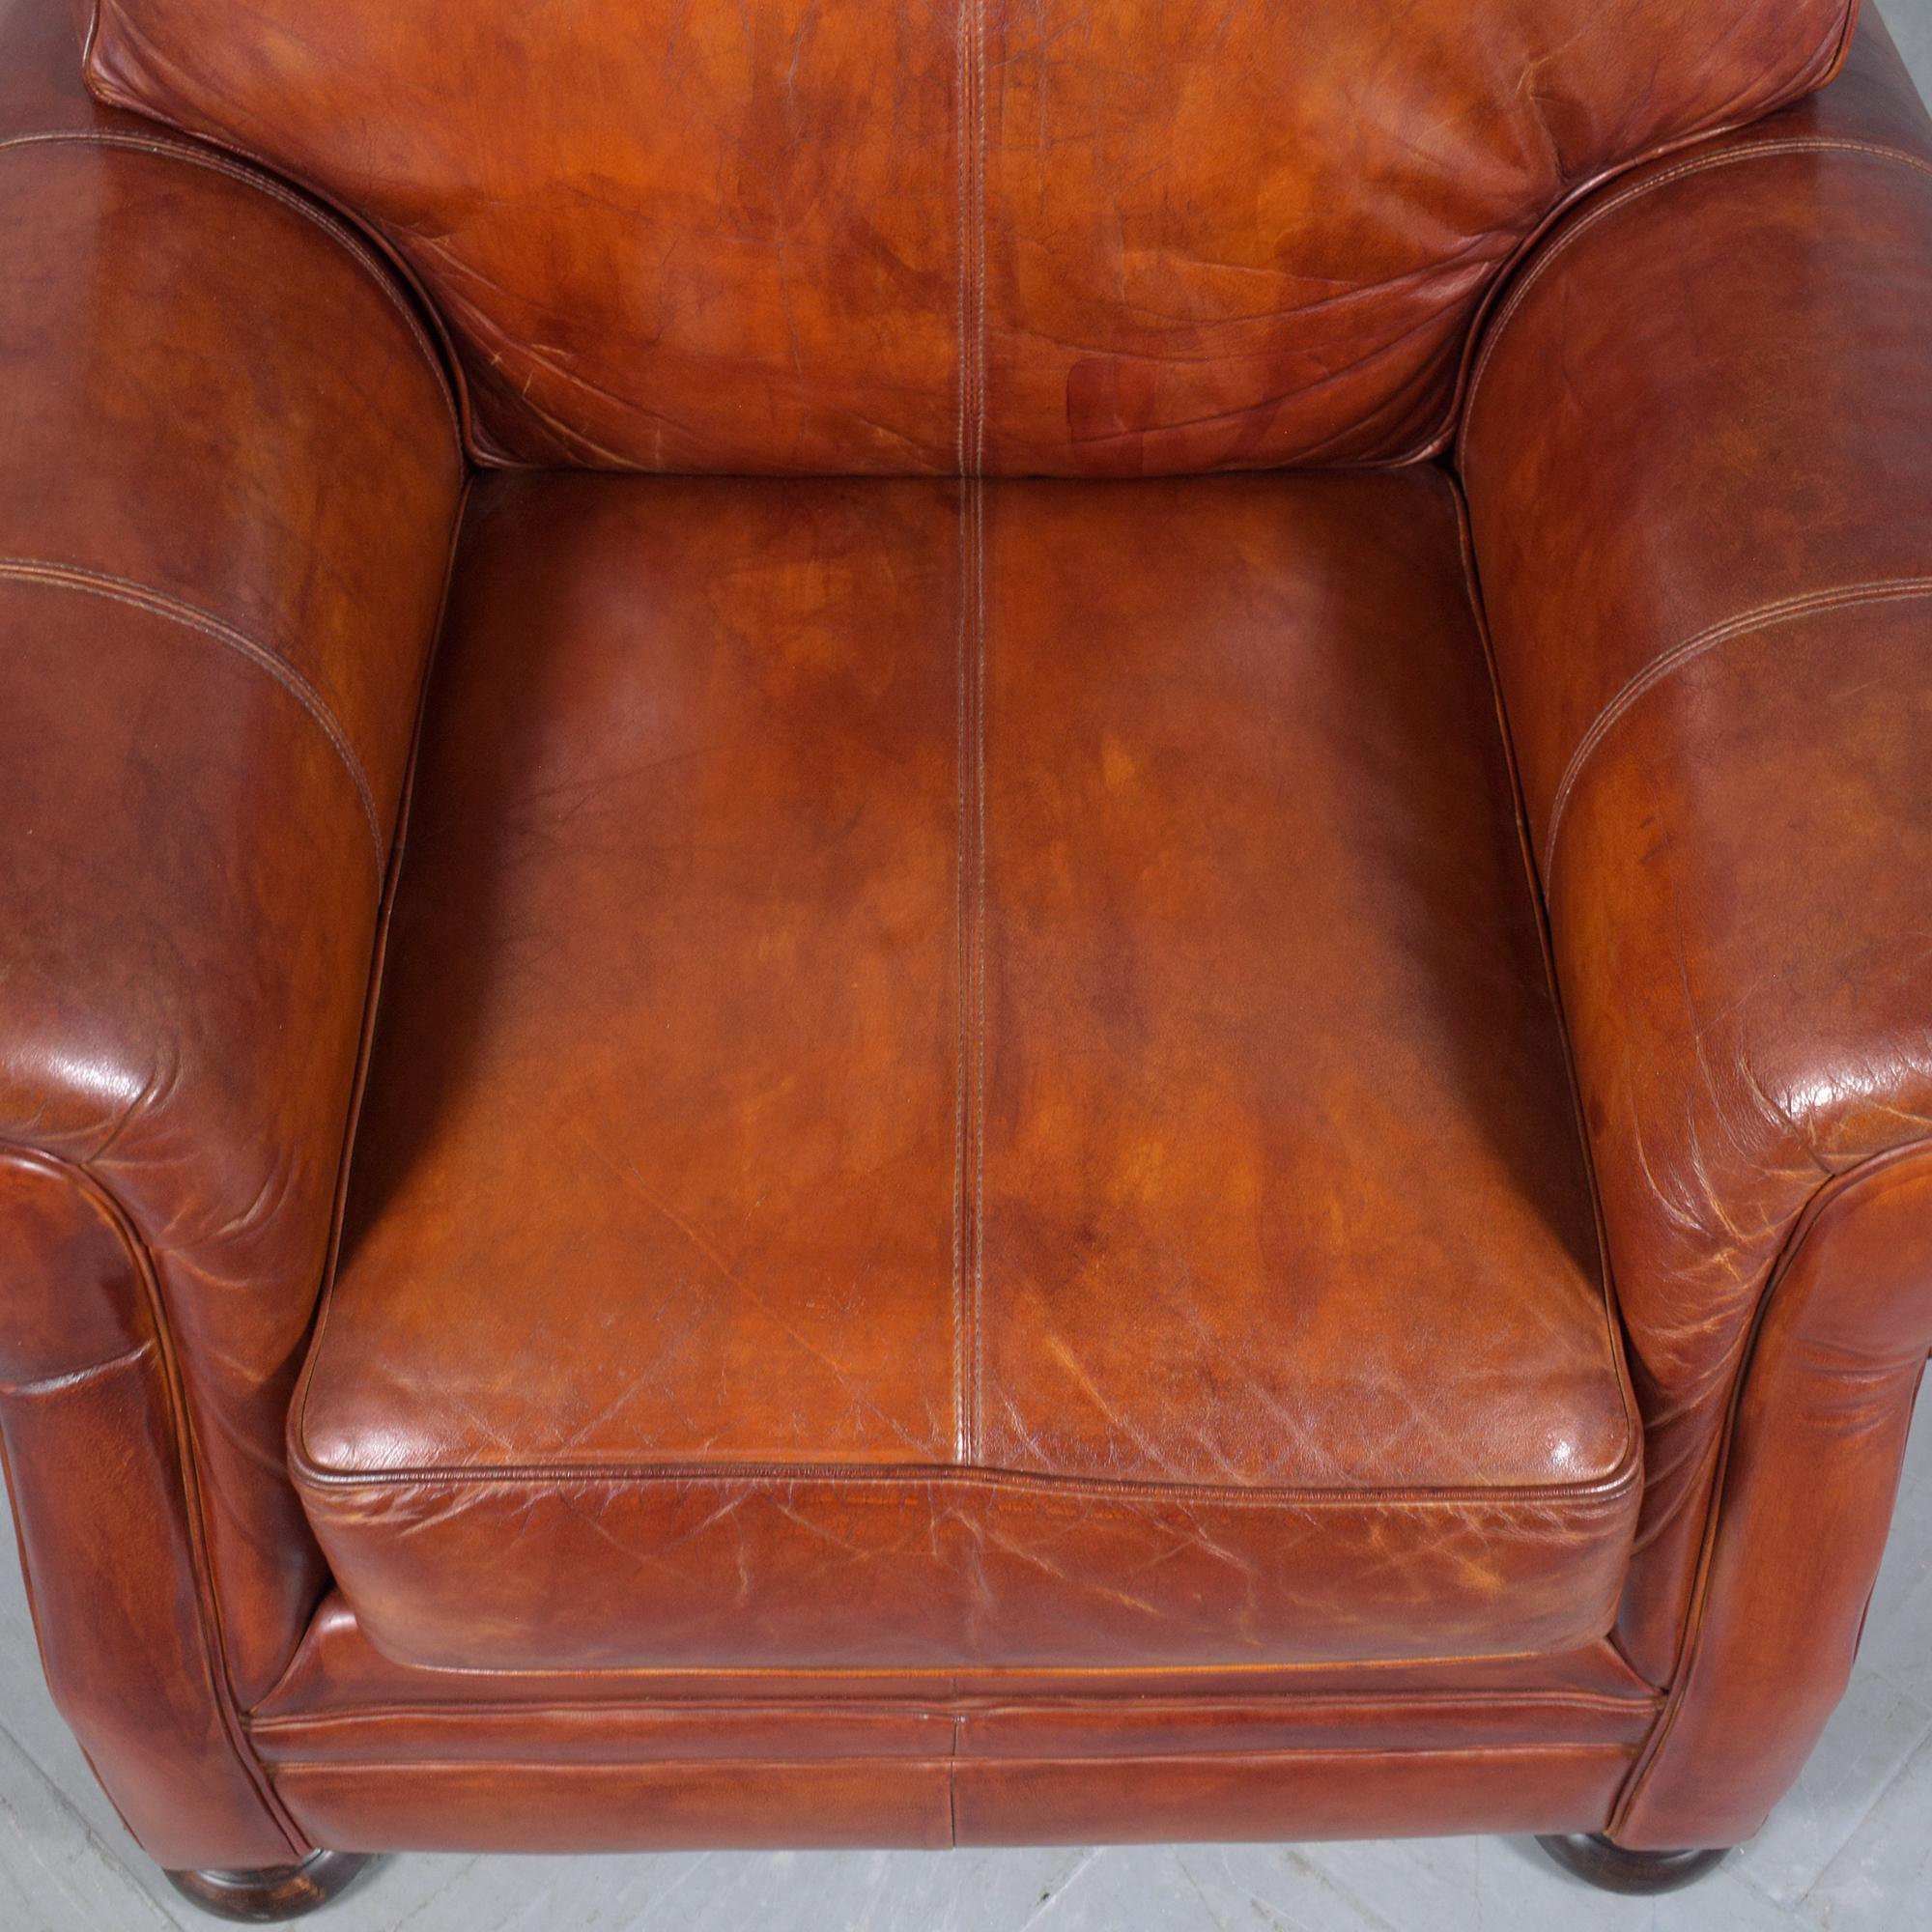 Restored Vintage Leather Armchairs in Cognac Brown with Carved Bun Legs For Sale 1